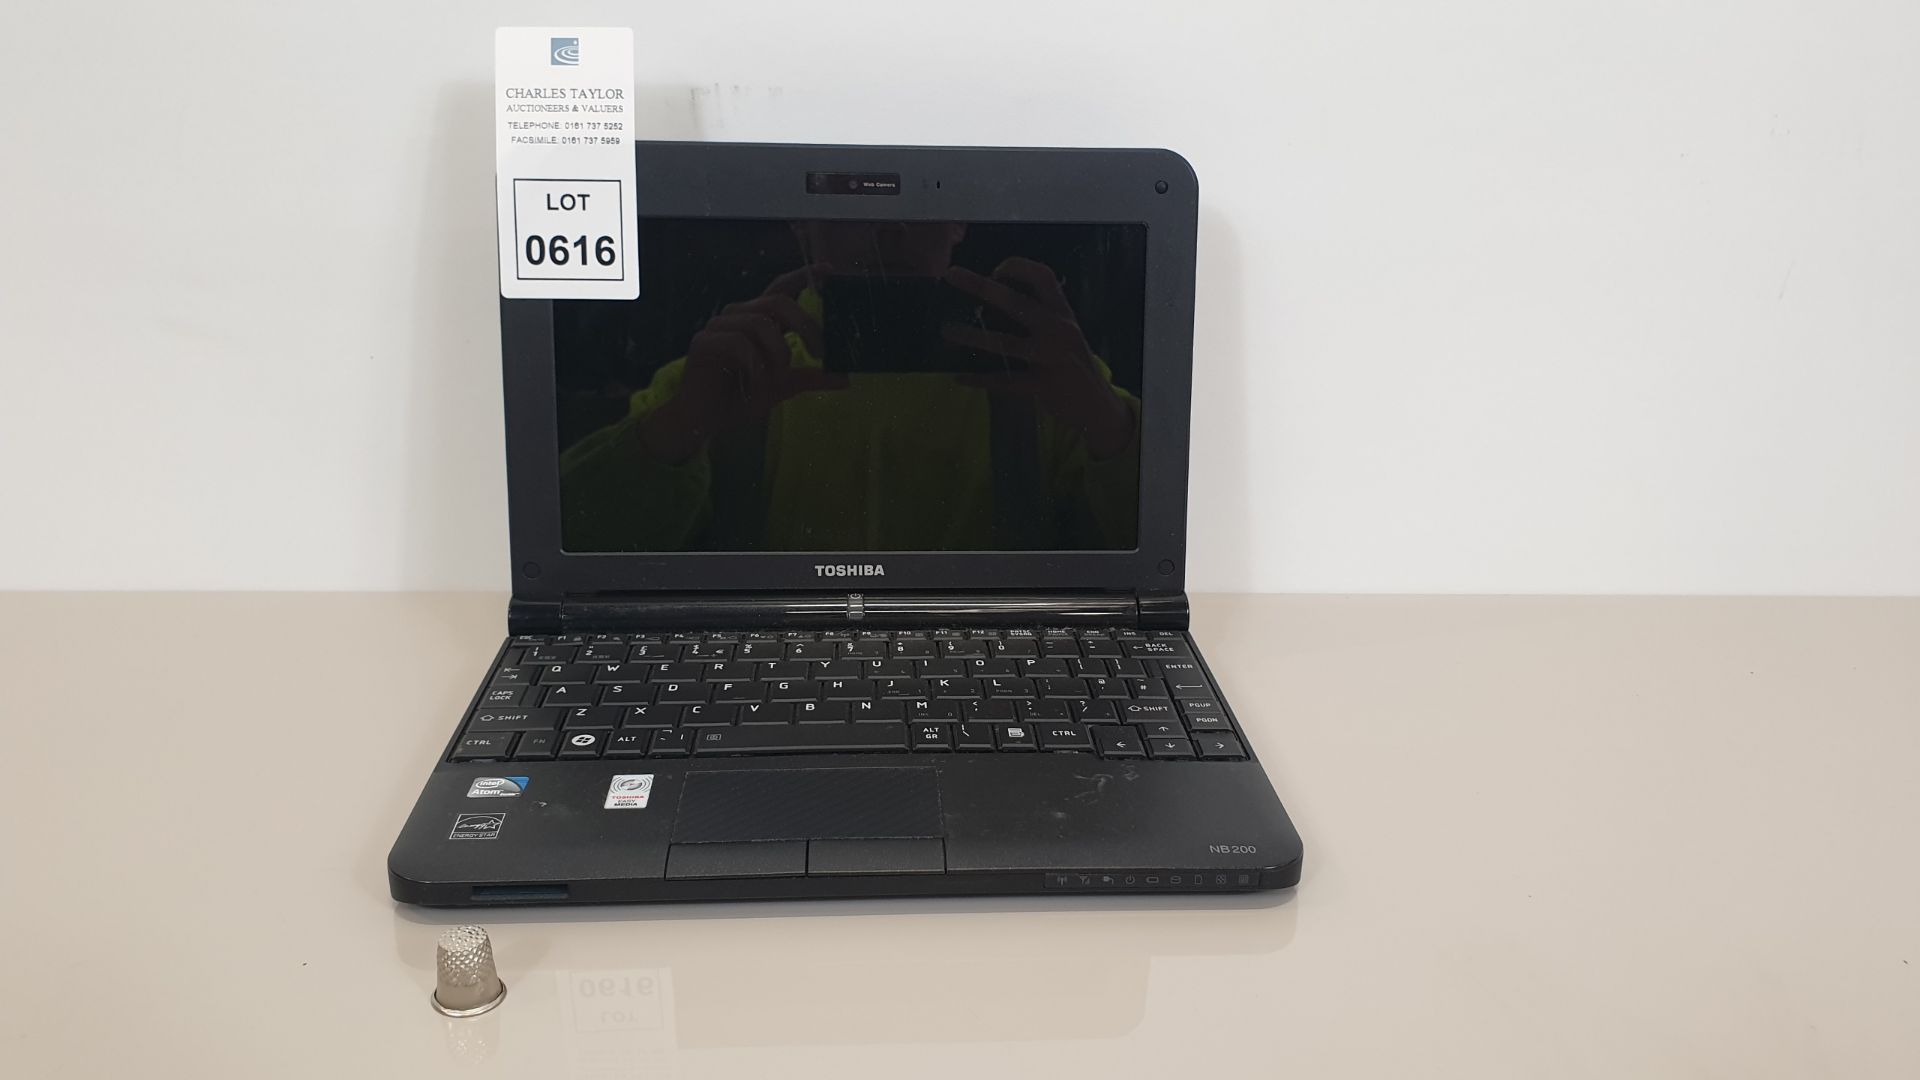 TOSHIBA LAPTOP (MODEL NB200123) COMES WITH WEBCAM AND CHARGER